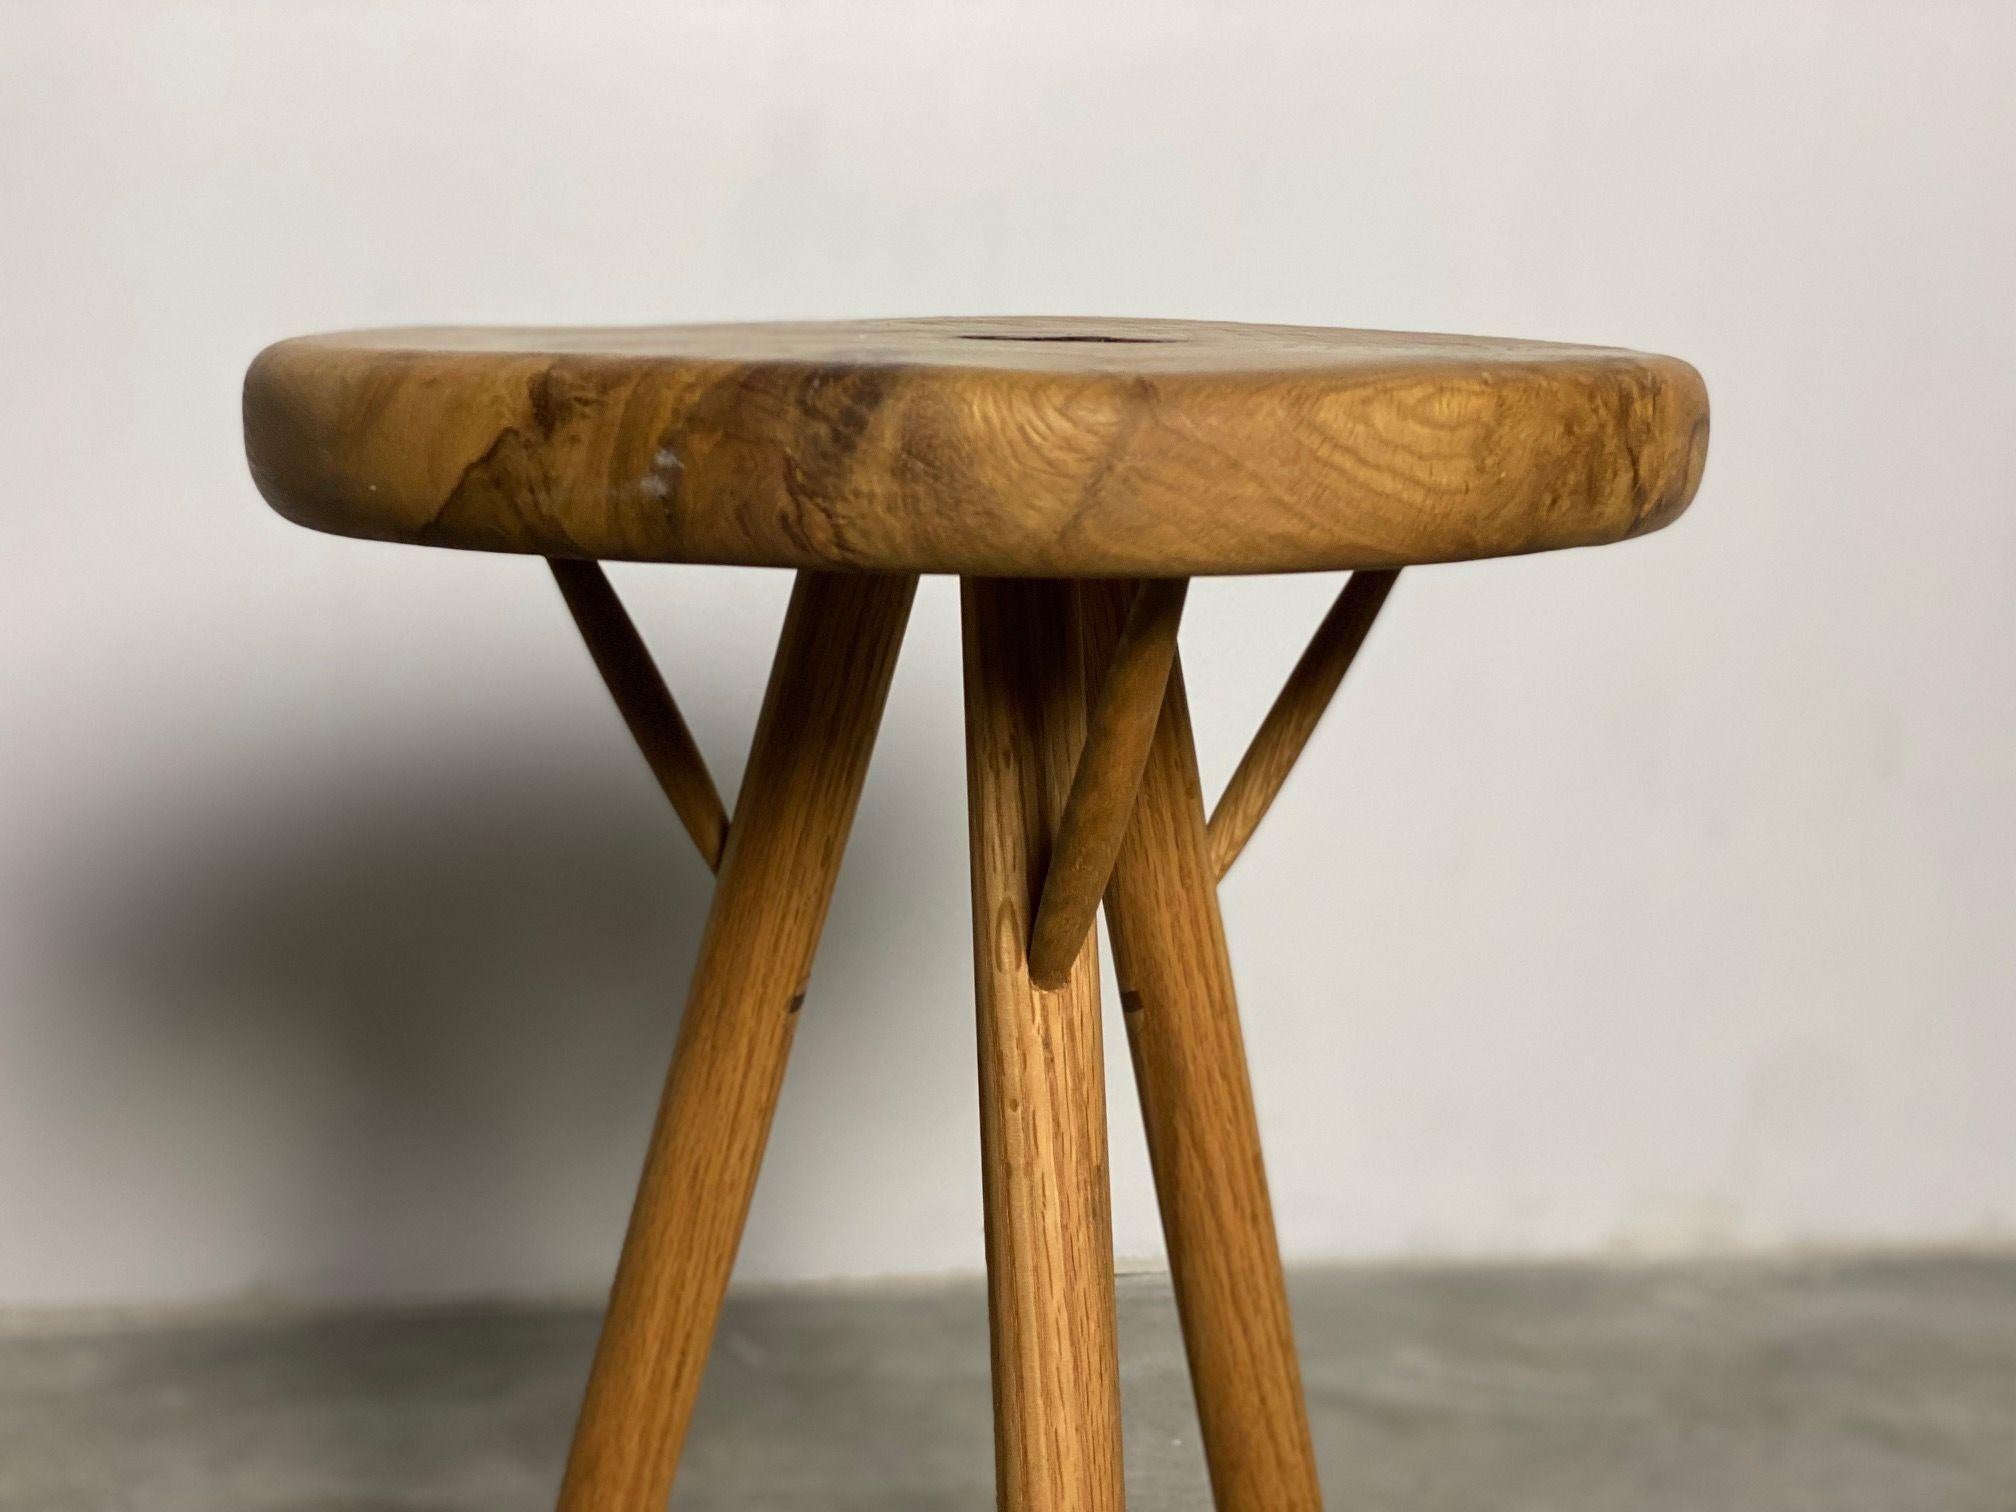 Hand-Crafted White Oak Burl Table by Michael Rozell, USA, 2021 For Sale 1